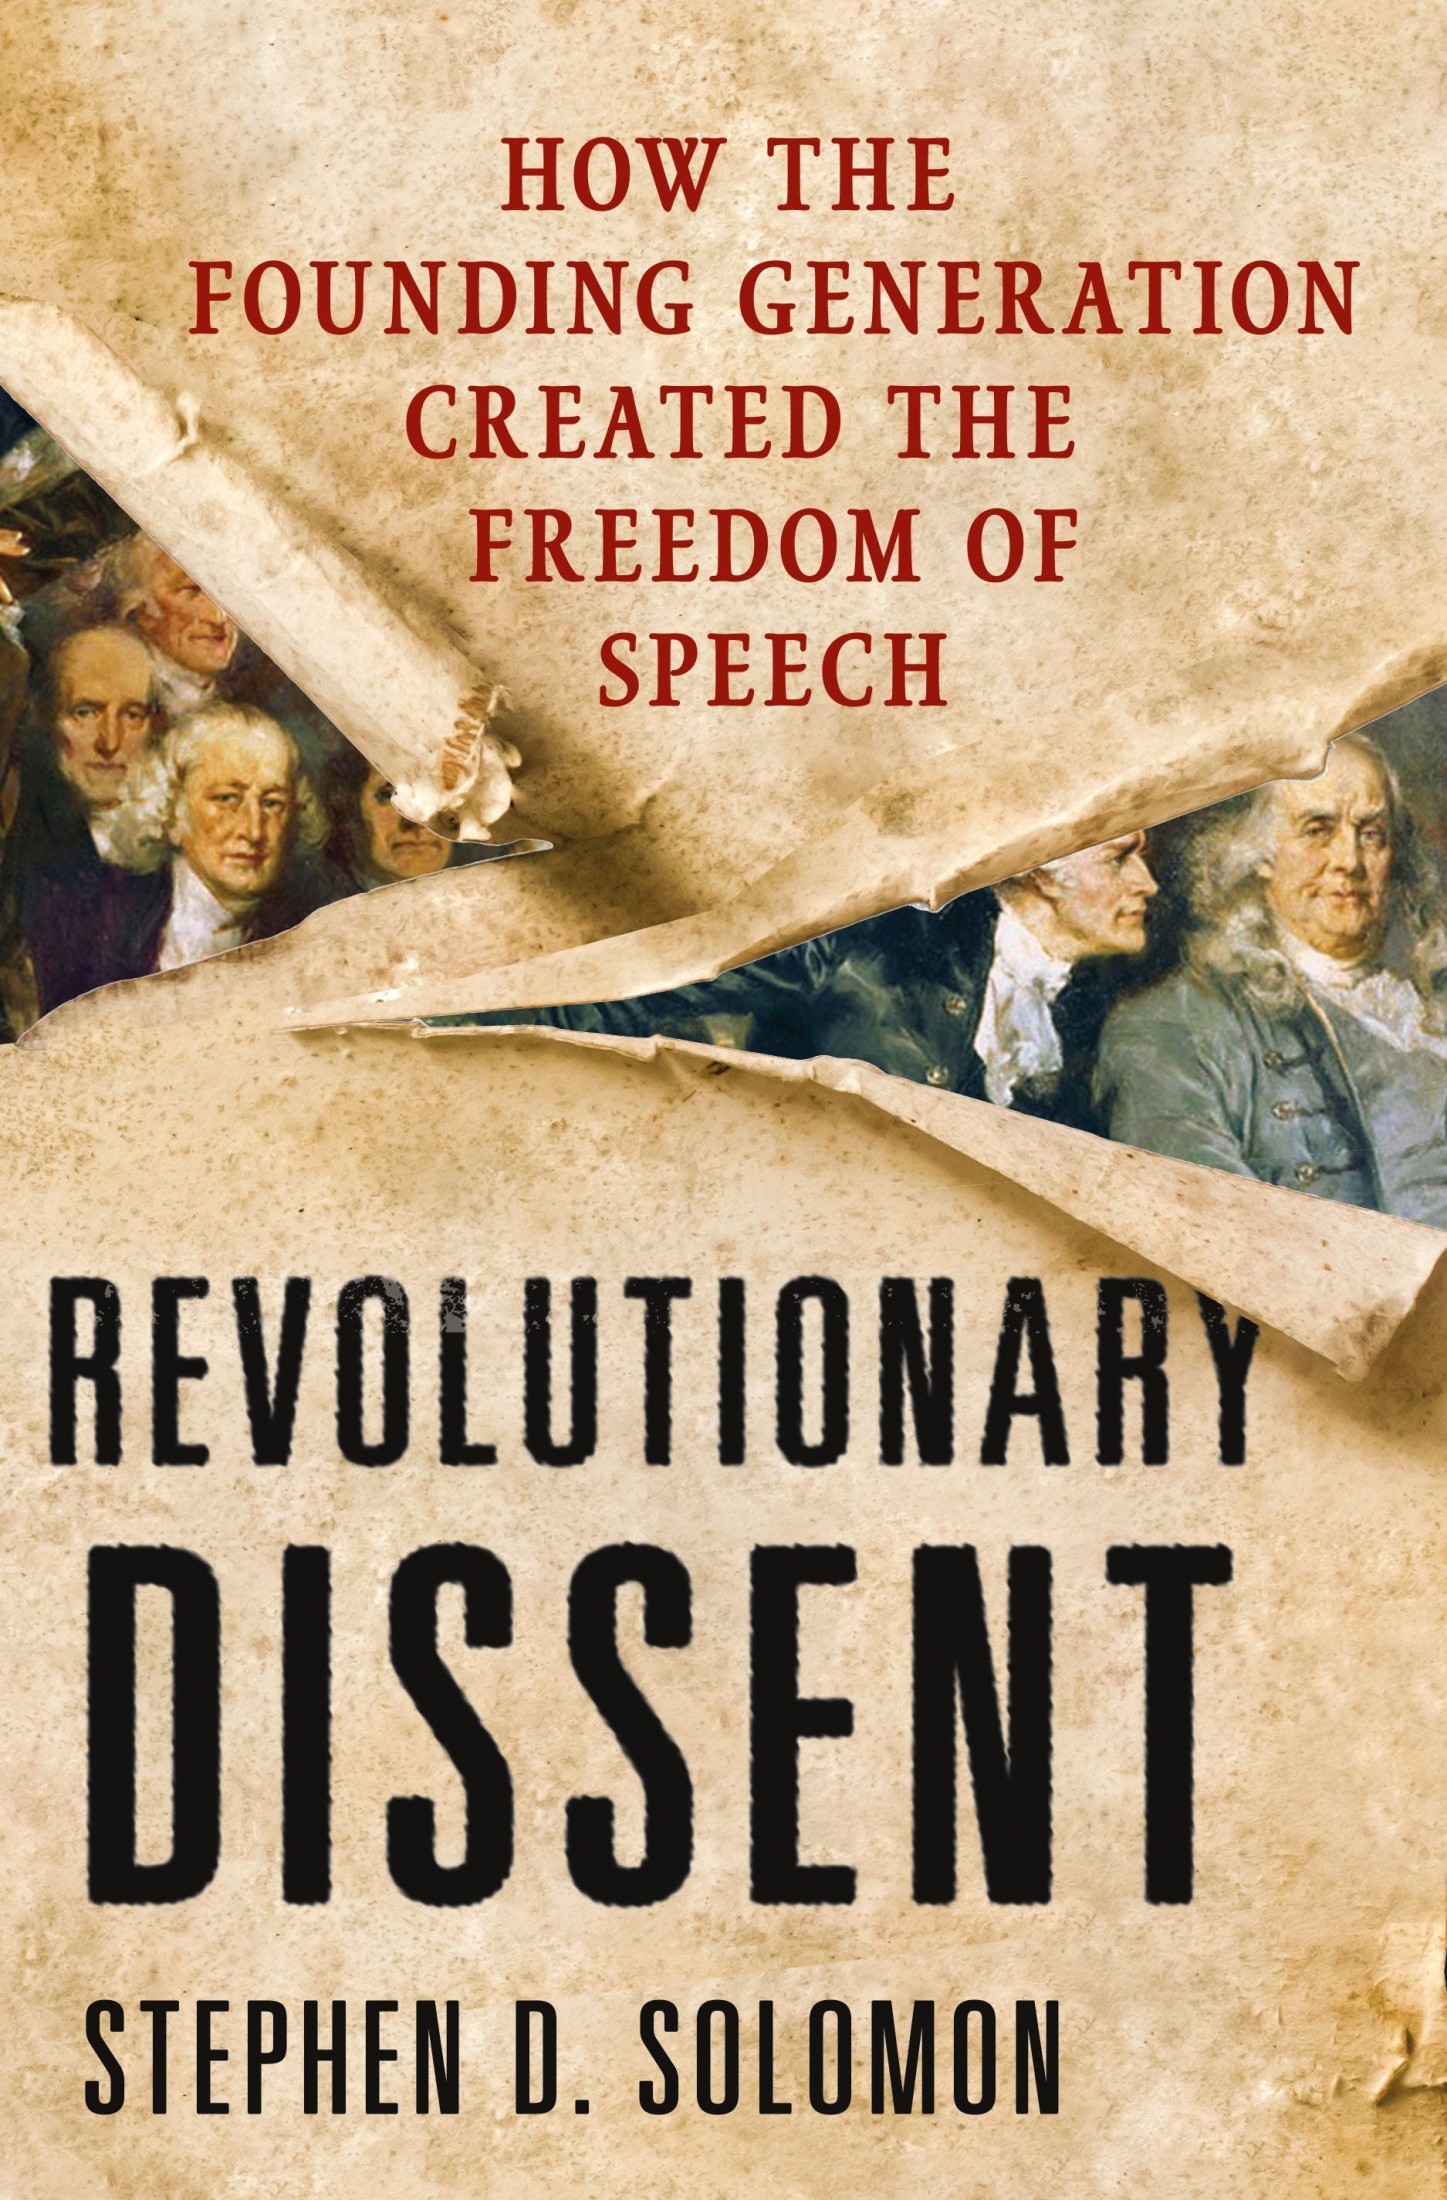 Revolutionary Dissent: How the Founding Generation Created the Freedom of Speech